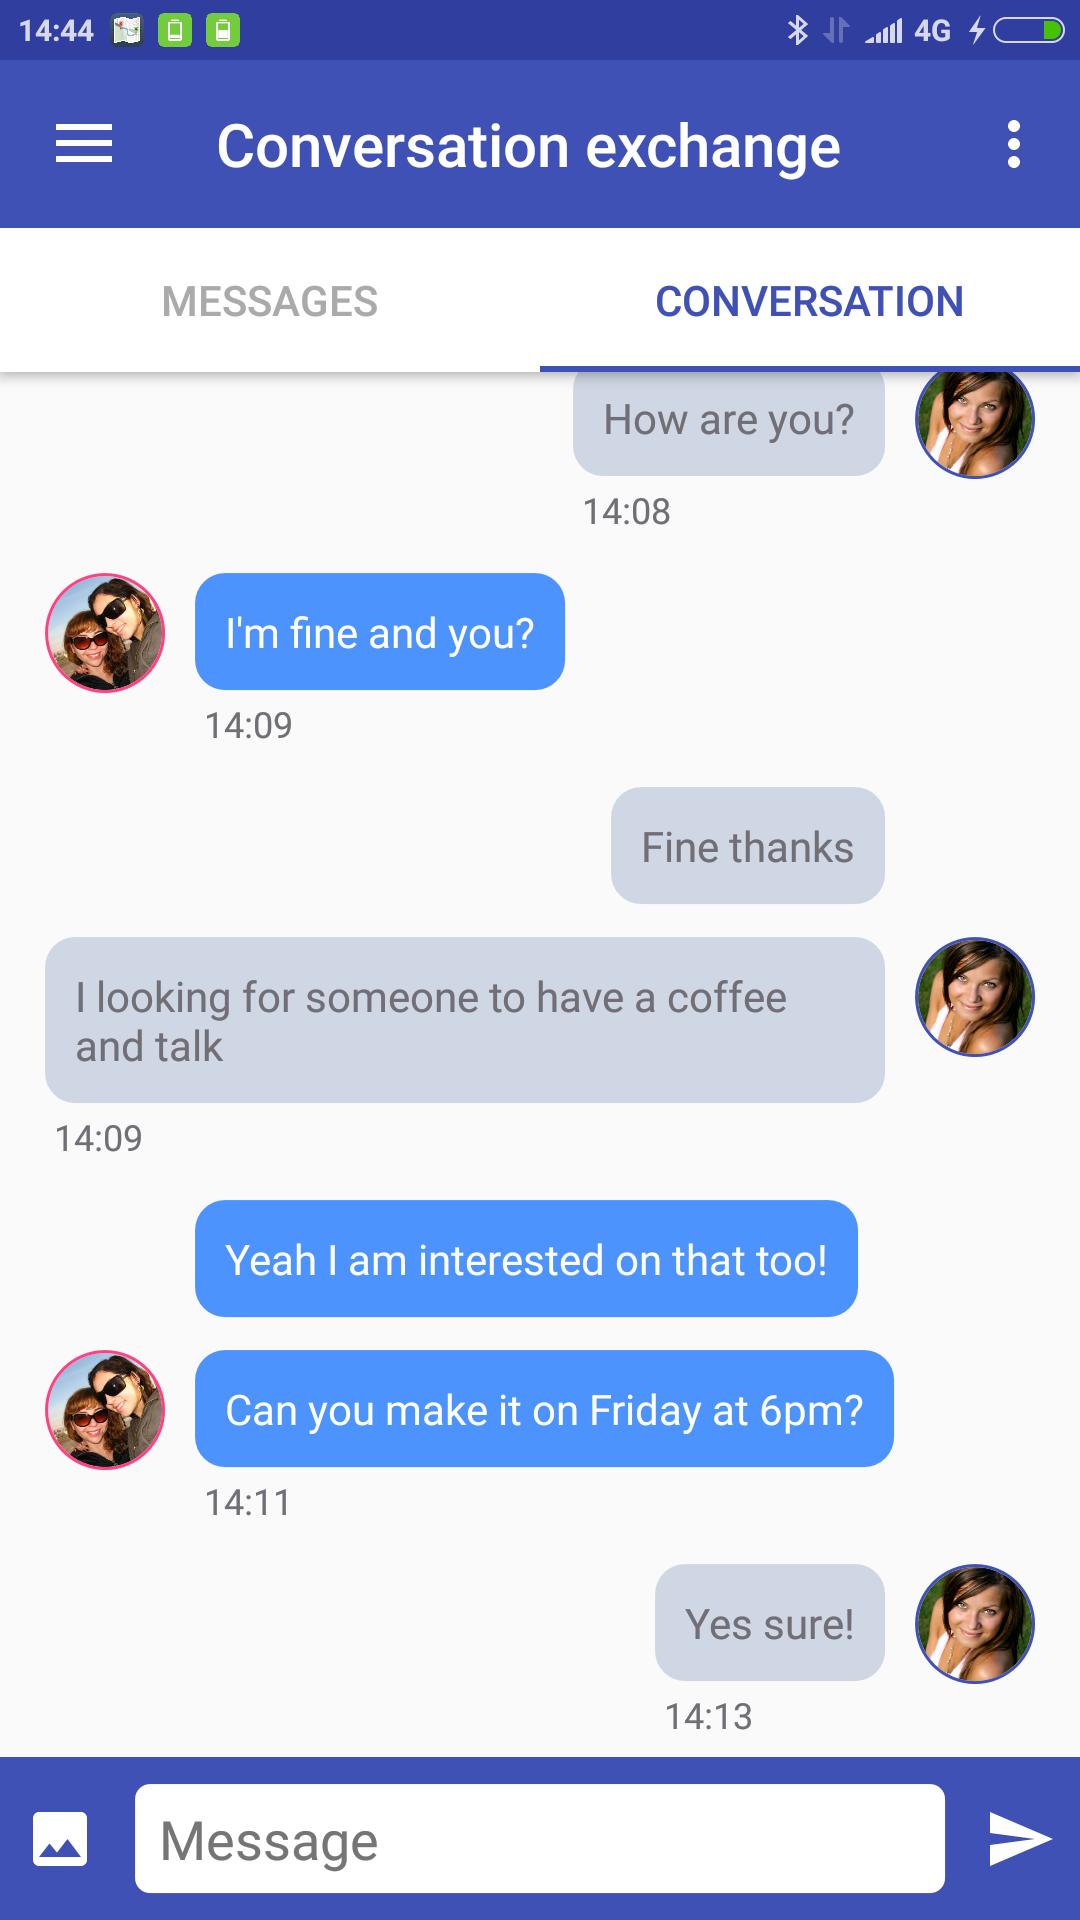 Conversation Exchange for Android - APK Download